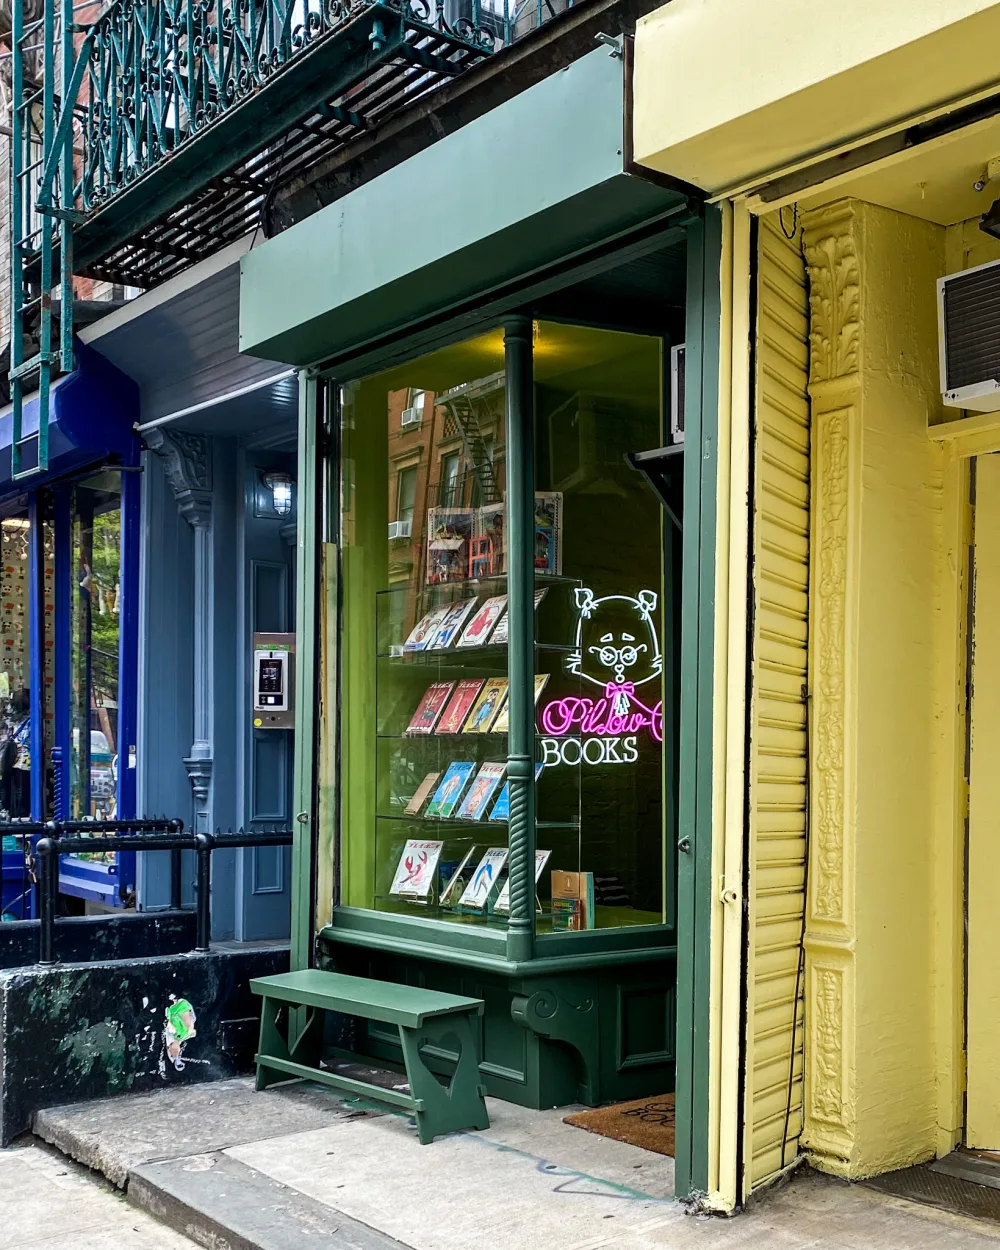 Pillow-Cat Books, NYC's First Animal-Centric Bookshop, Opens in